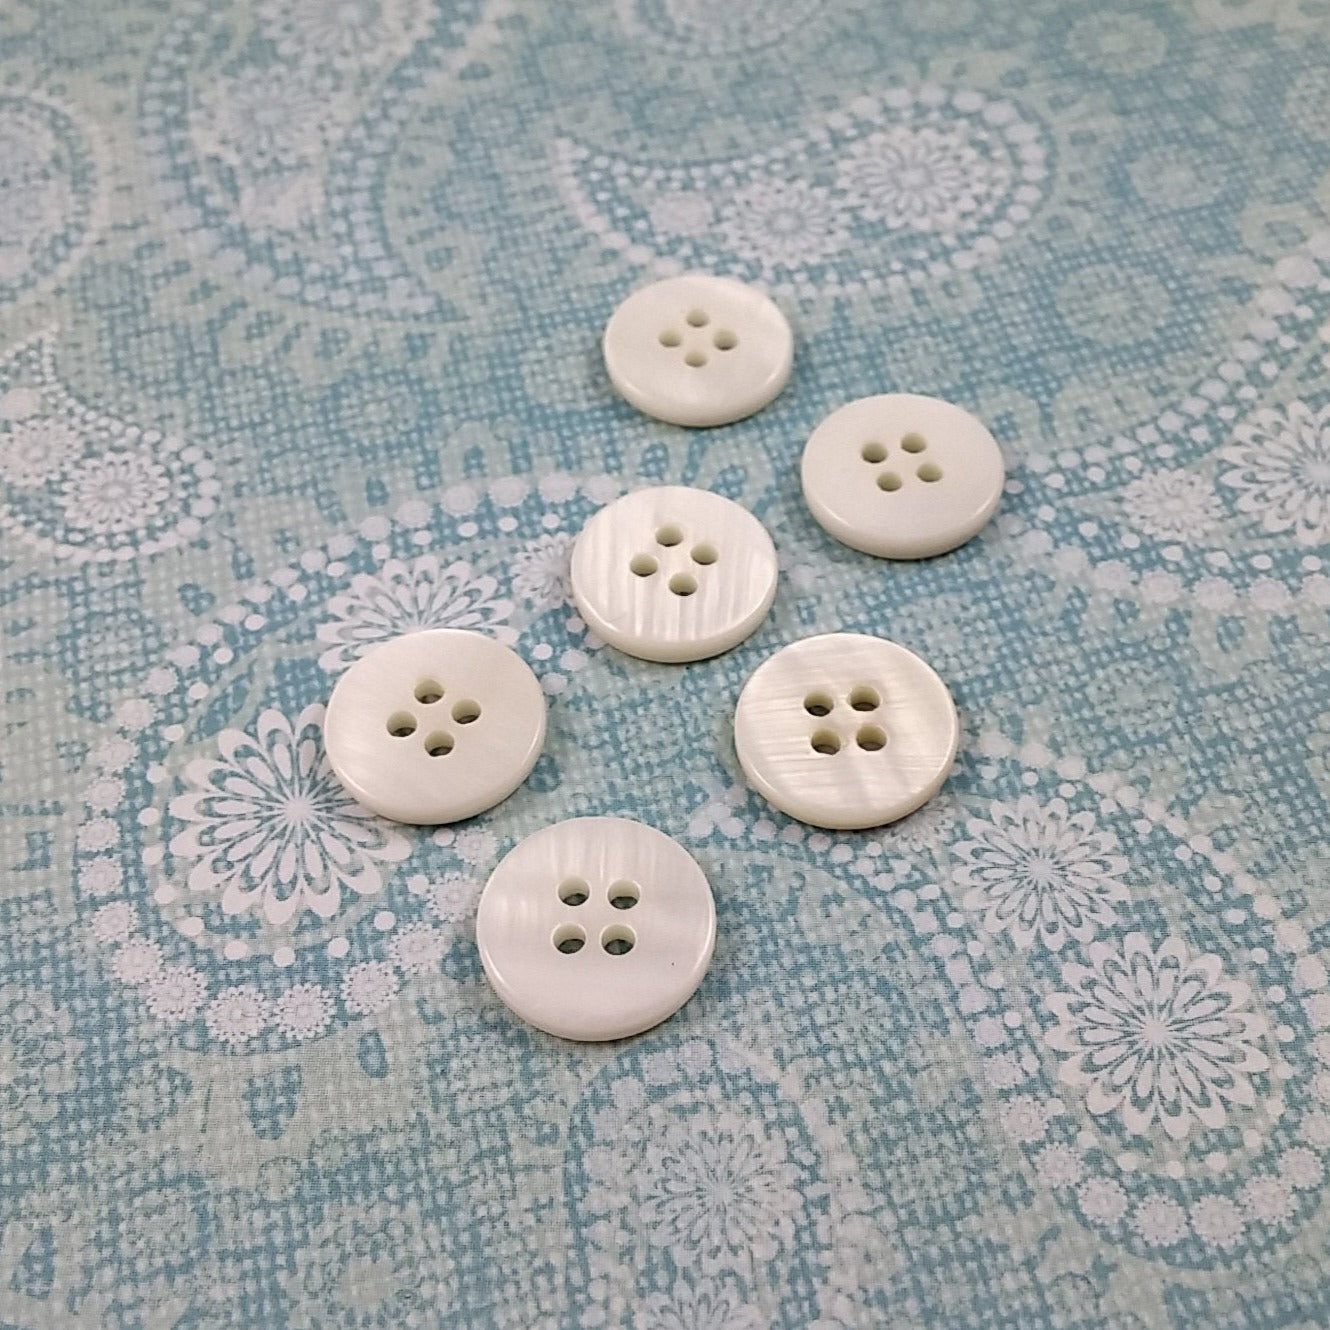 Mother of Pearl Shell Buttons 0.5 inch - set of 6 eco friendly natural buttons